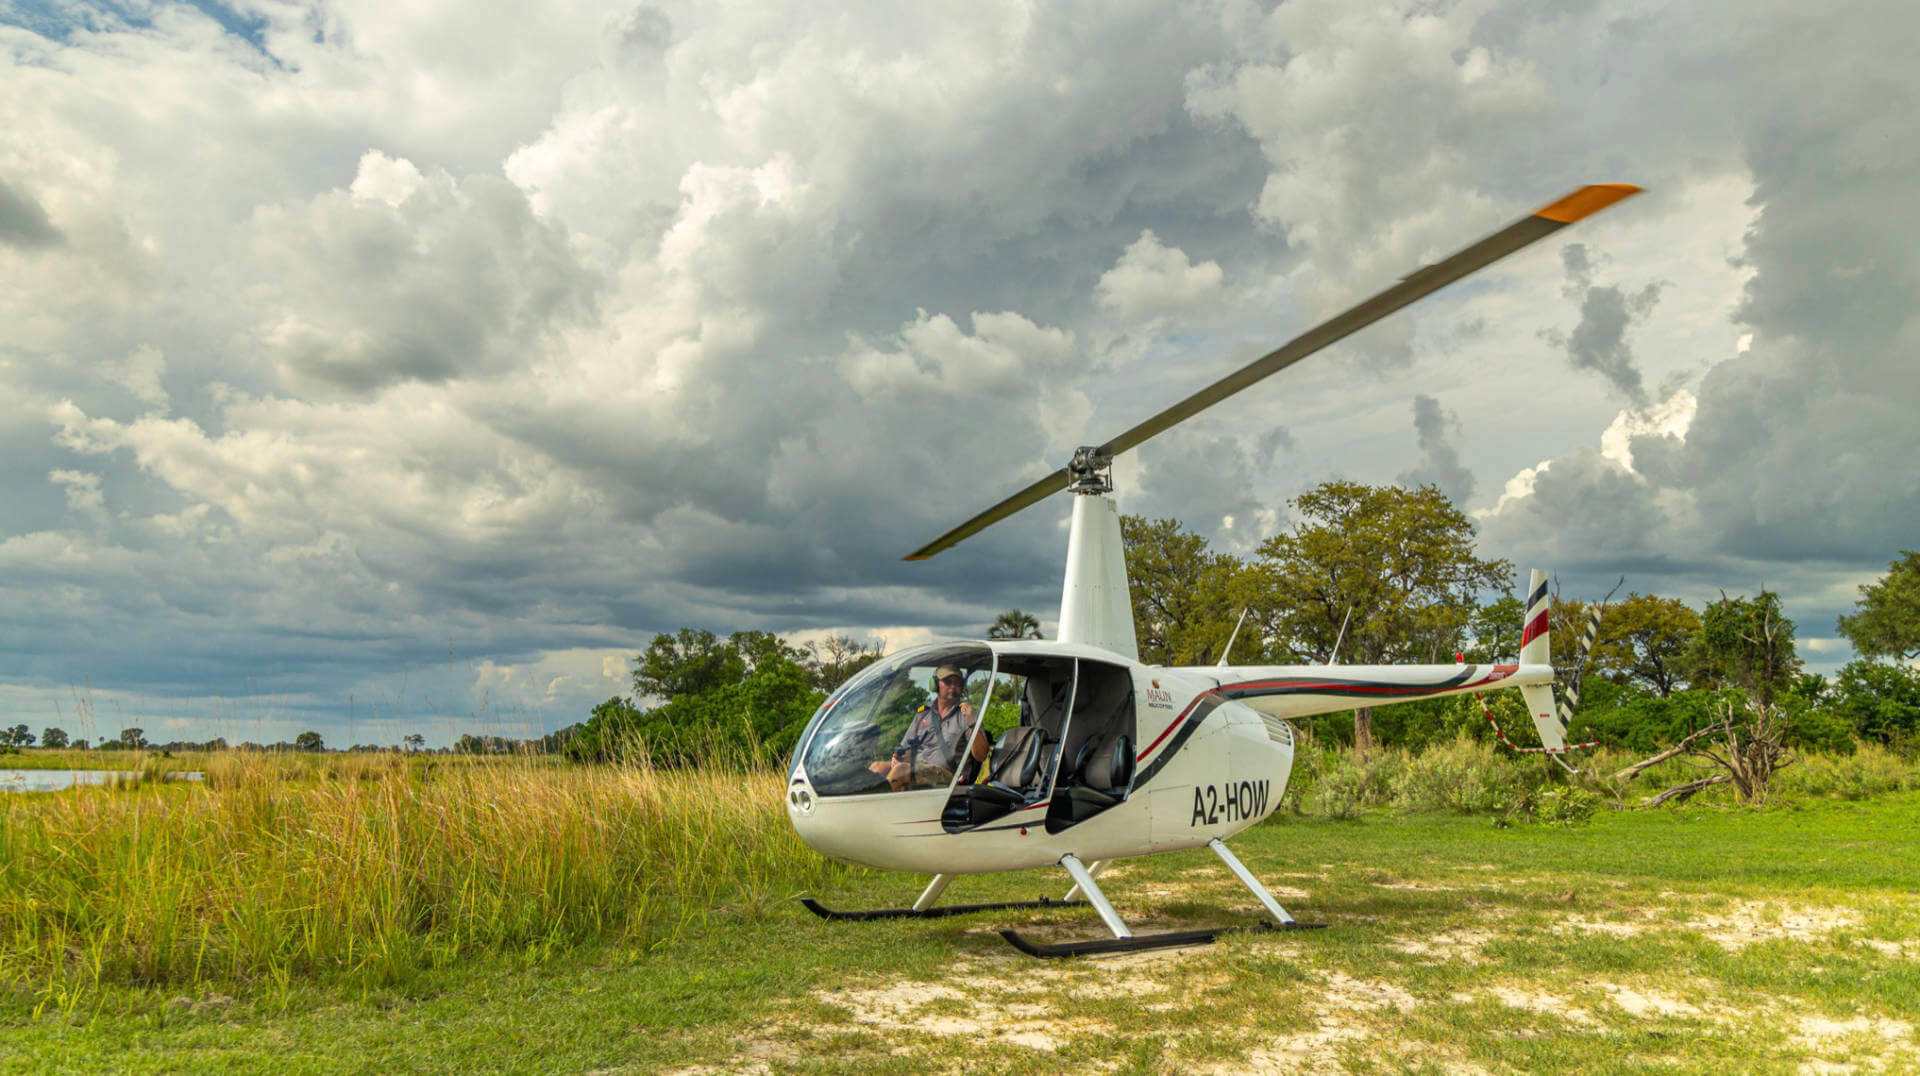 LUXURY SAFARI MAGAZINE WELCOMES CAPE TOWN HELICOPTERS